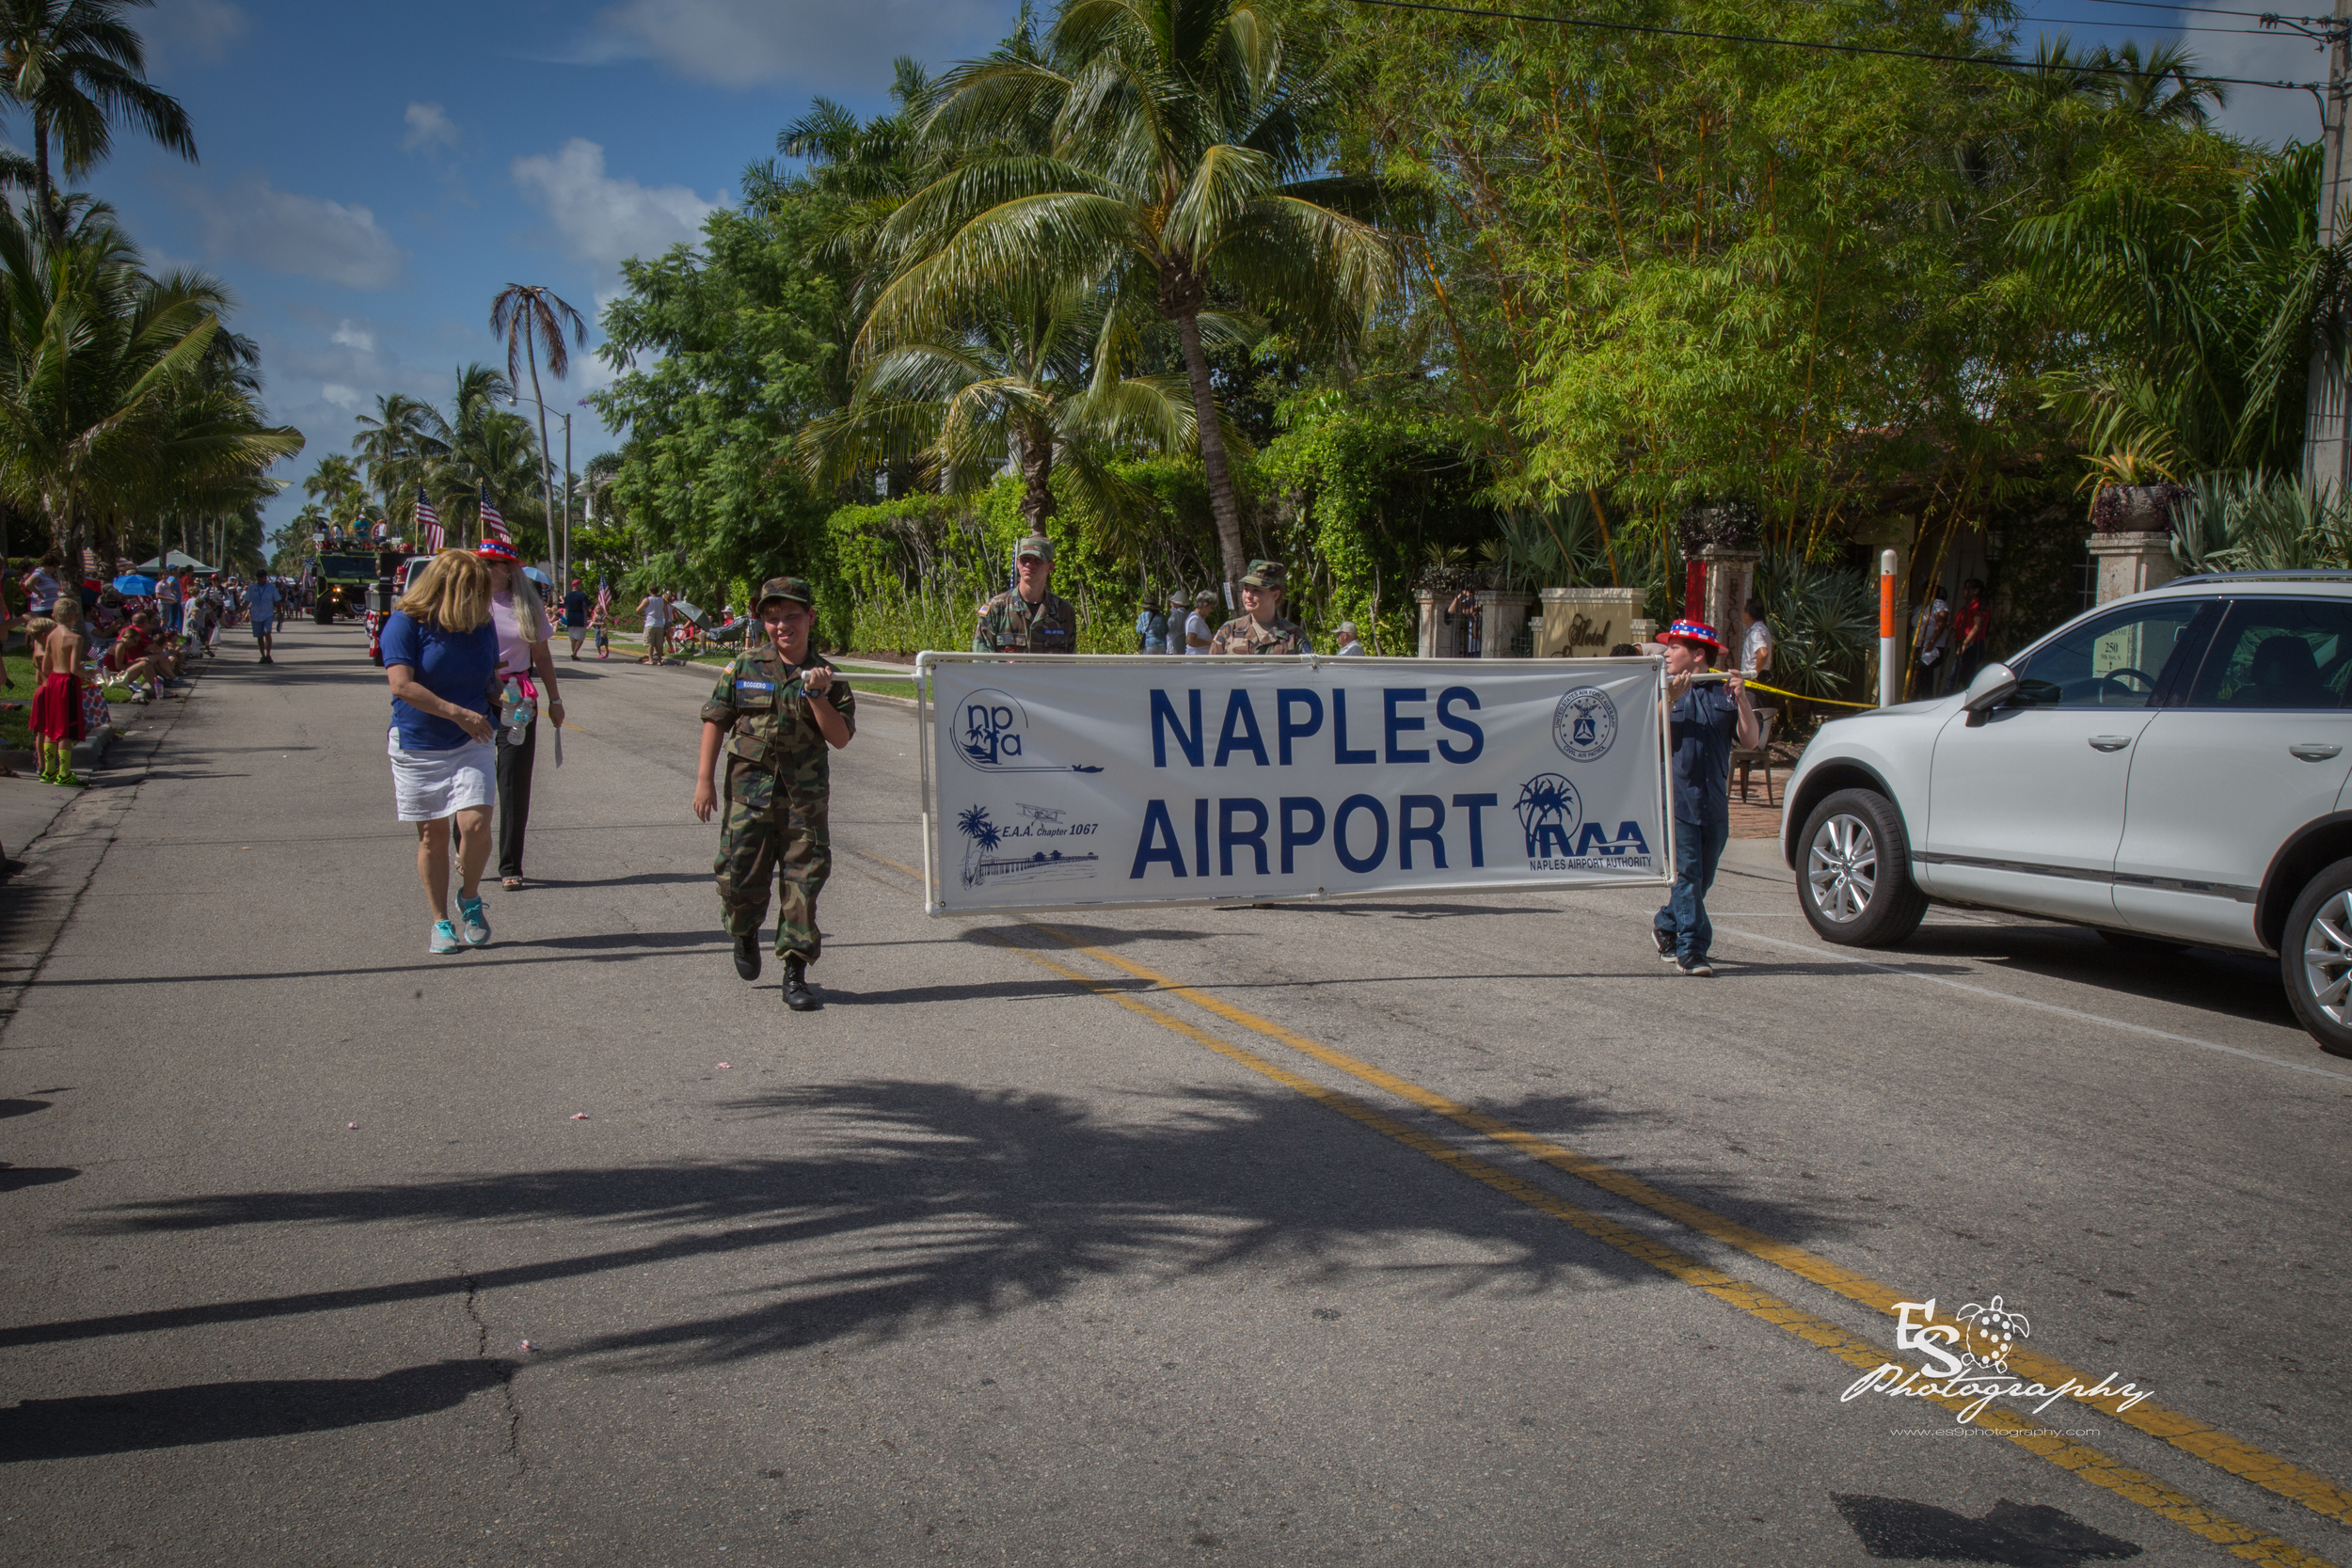 City of Naples July 4th Parade 2016 @ ES9 Photography 2016-52.jpg